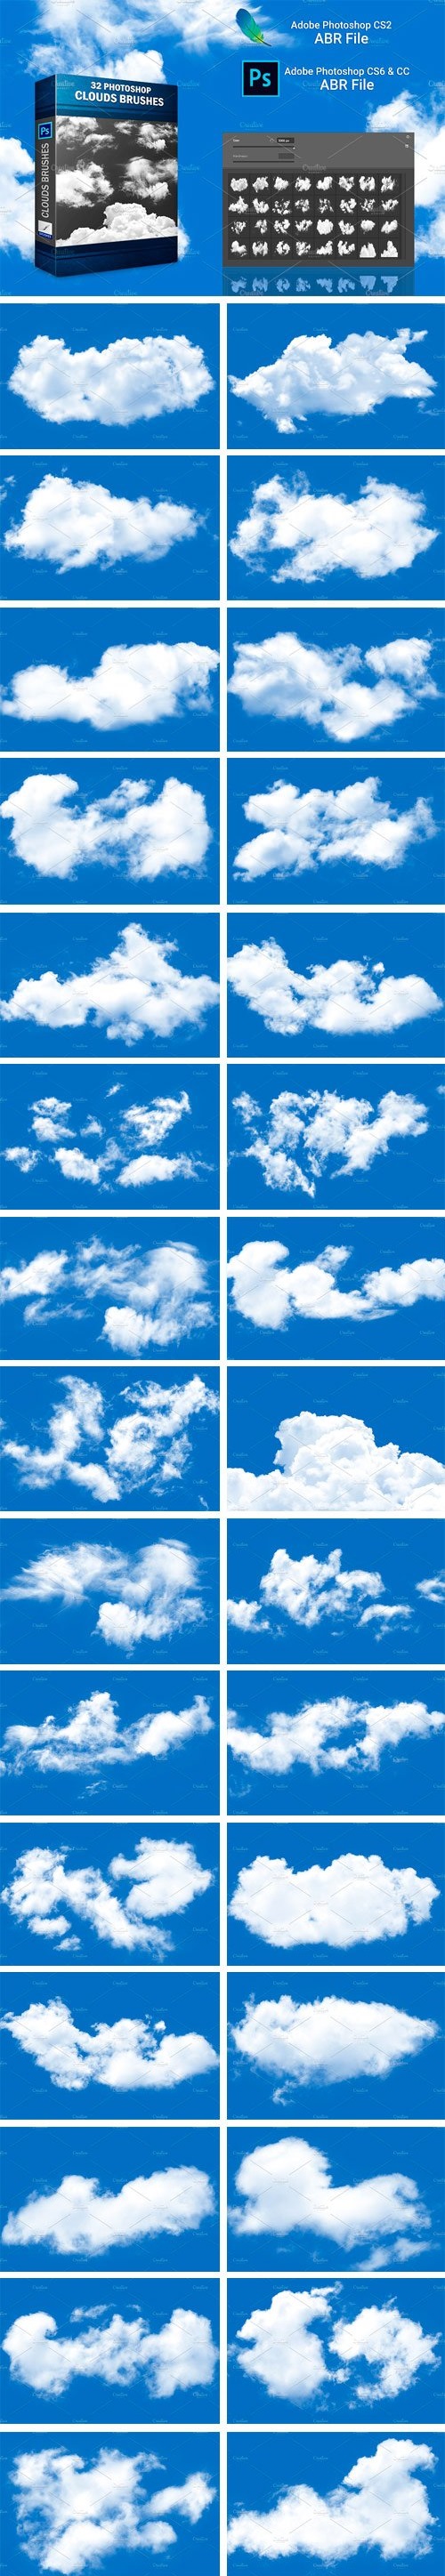 Clouds Brushes - 2165569